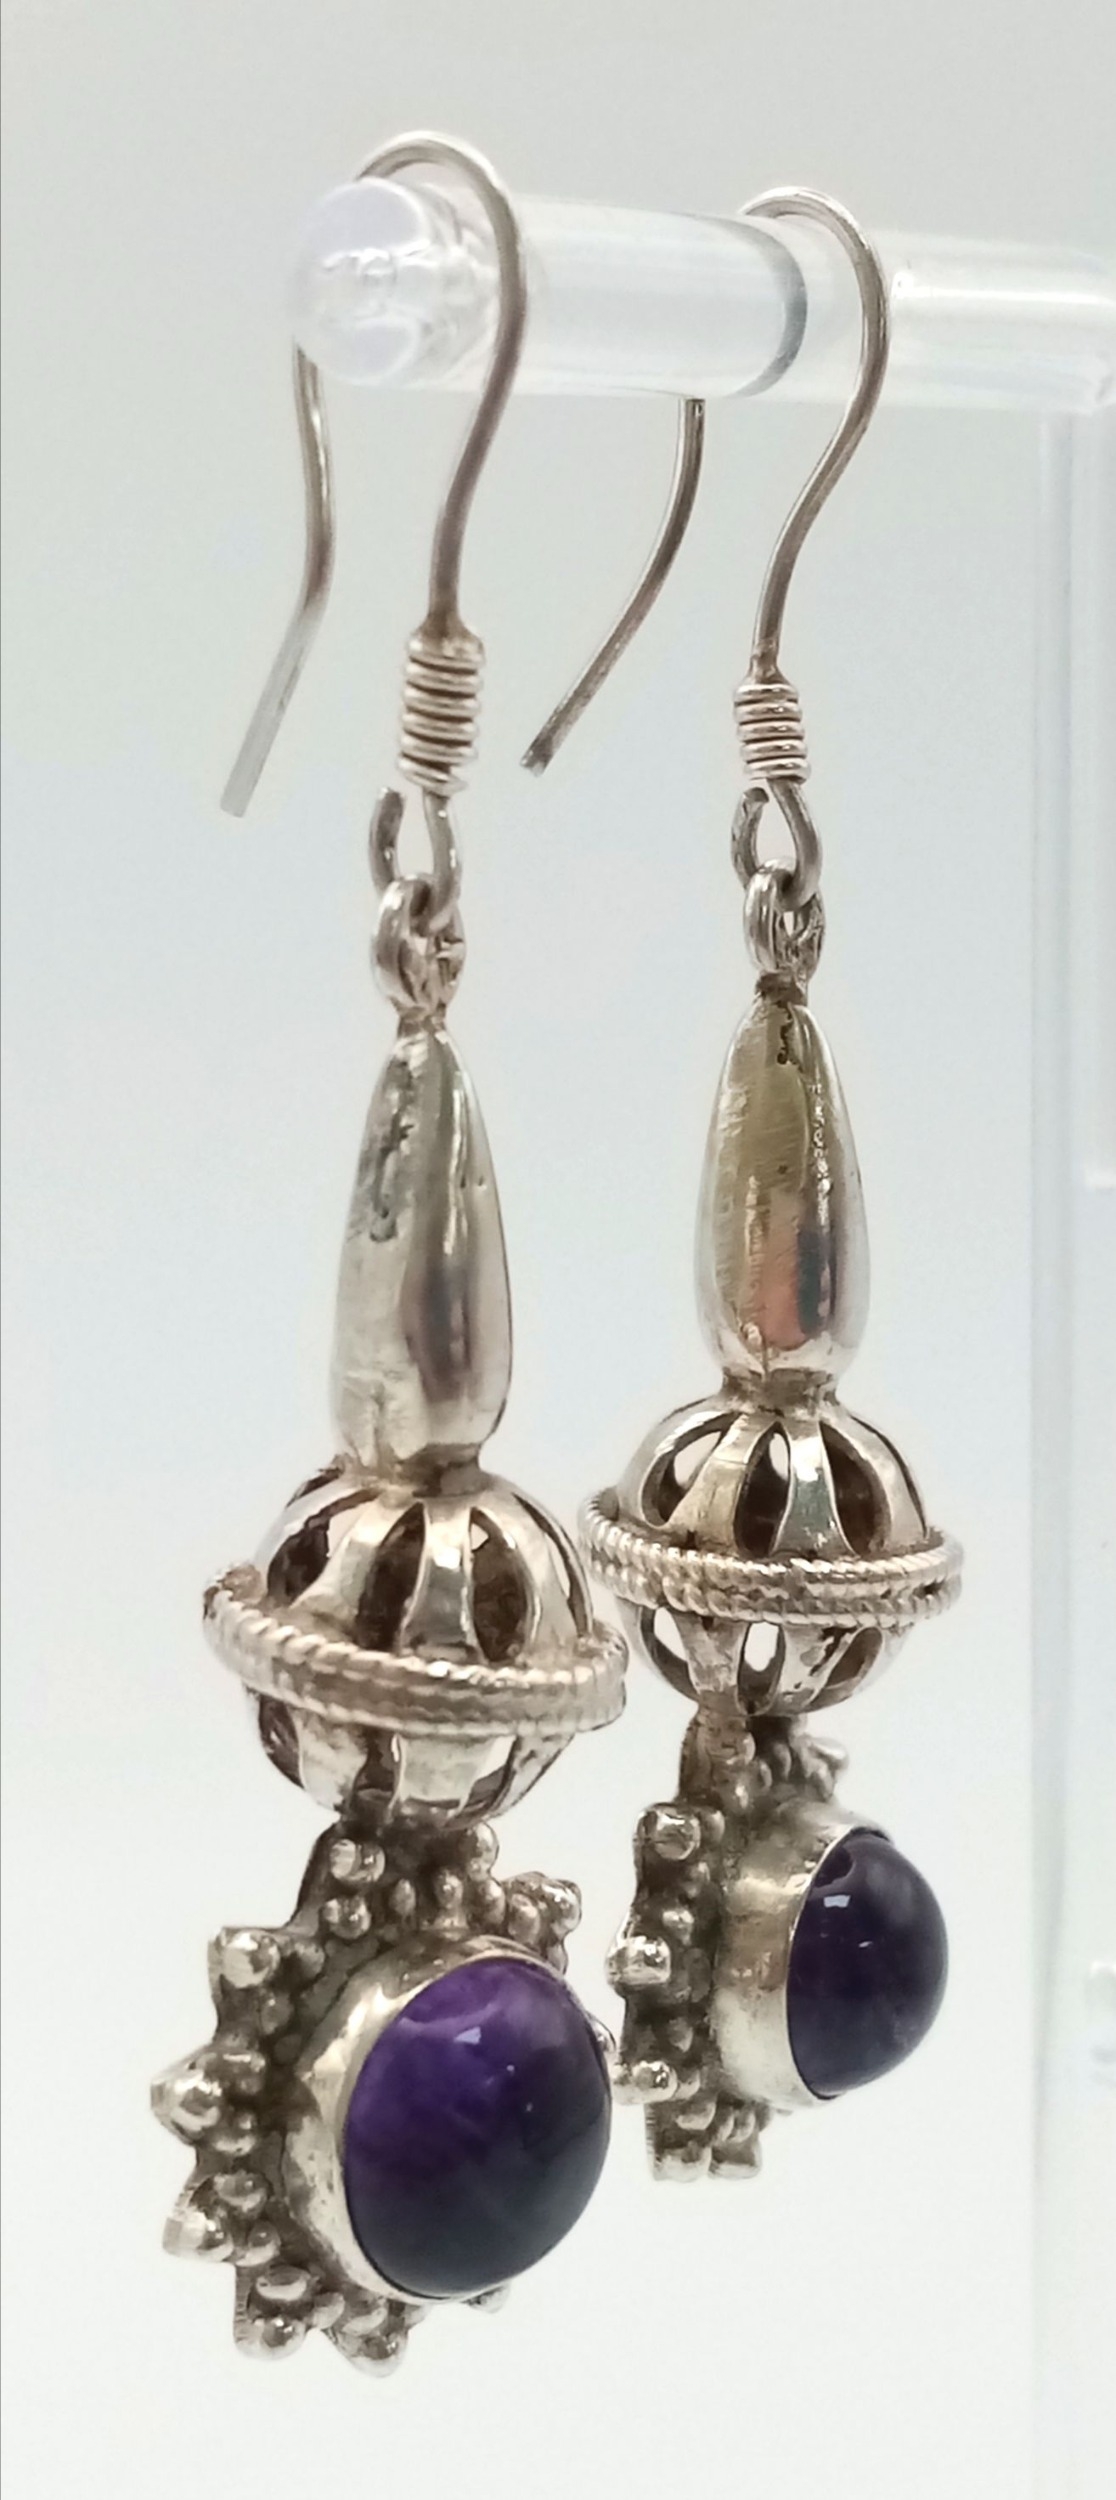 A Pair of Sterling Silver and Amethyst Drop Earrings. Decorative 4cm drops with amethyst cabochons. - Image 3 of 5